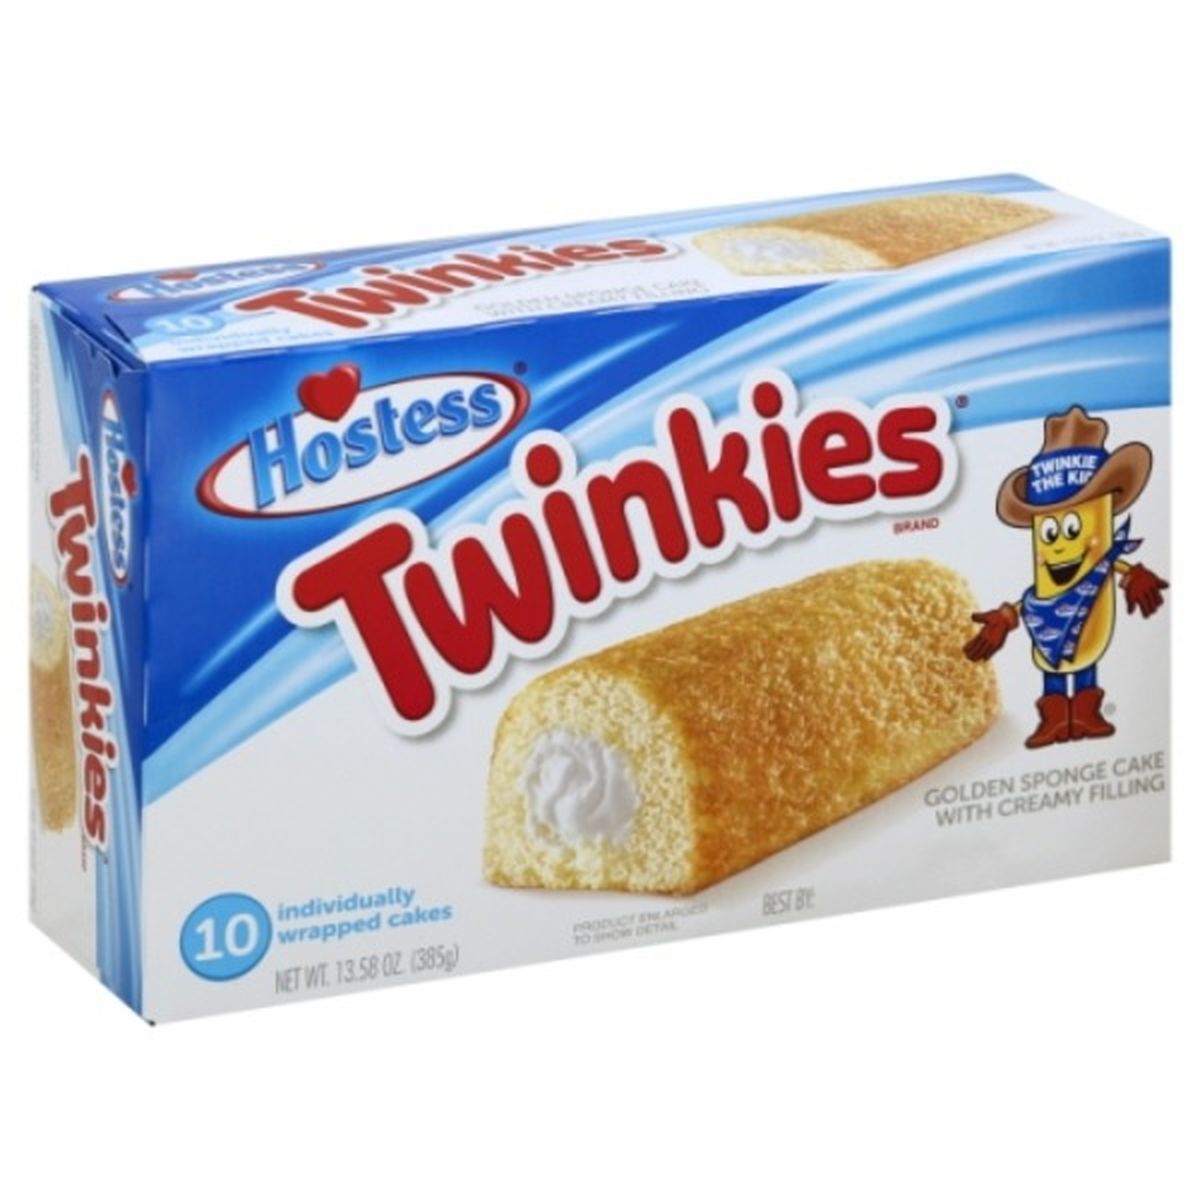 Calories in Hostess Twinkies